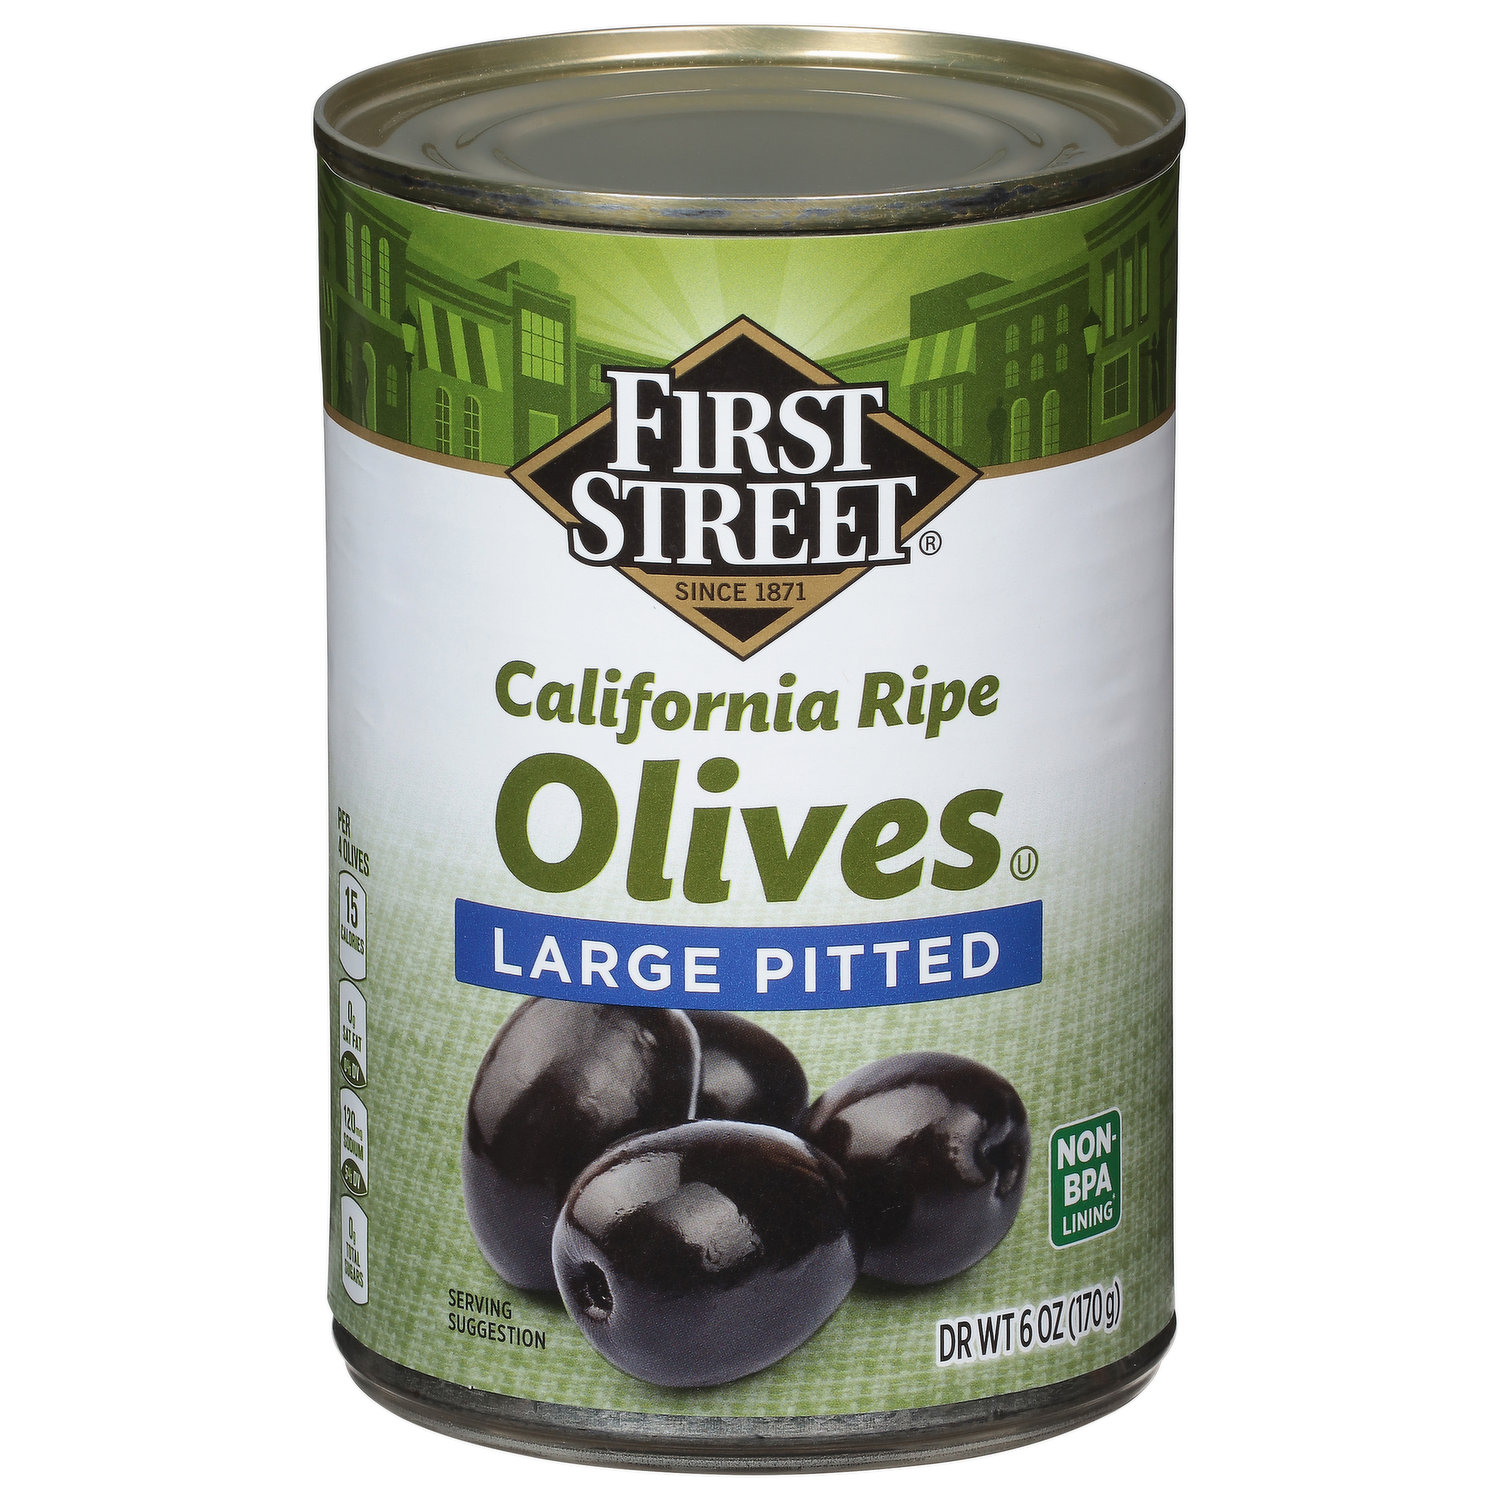 No Name Extra Large Pitted Ripe Olives - 398 ml